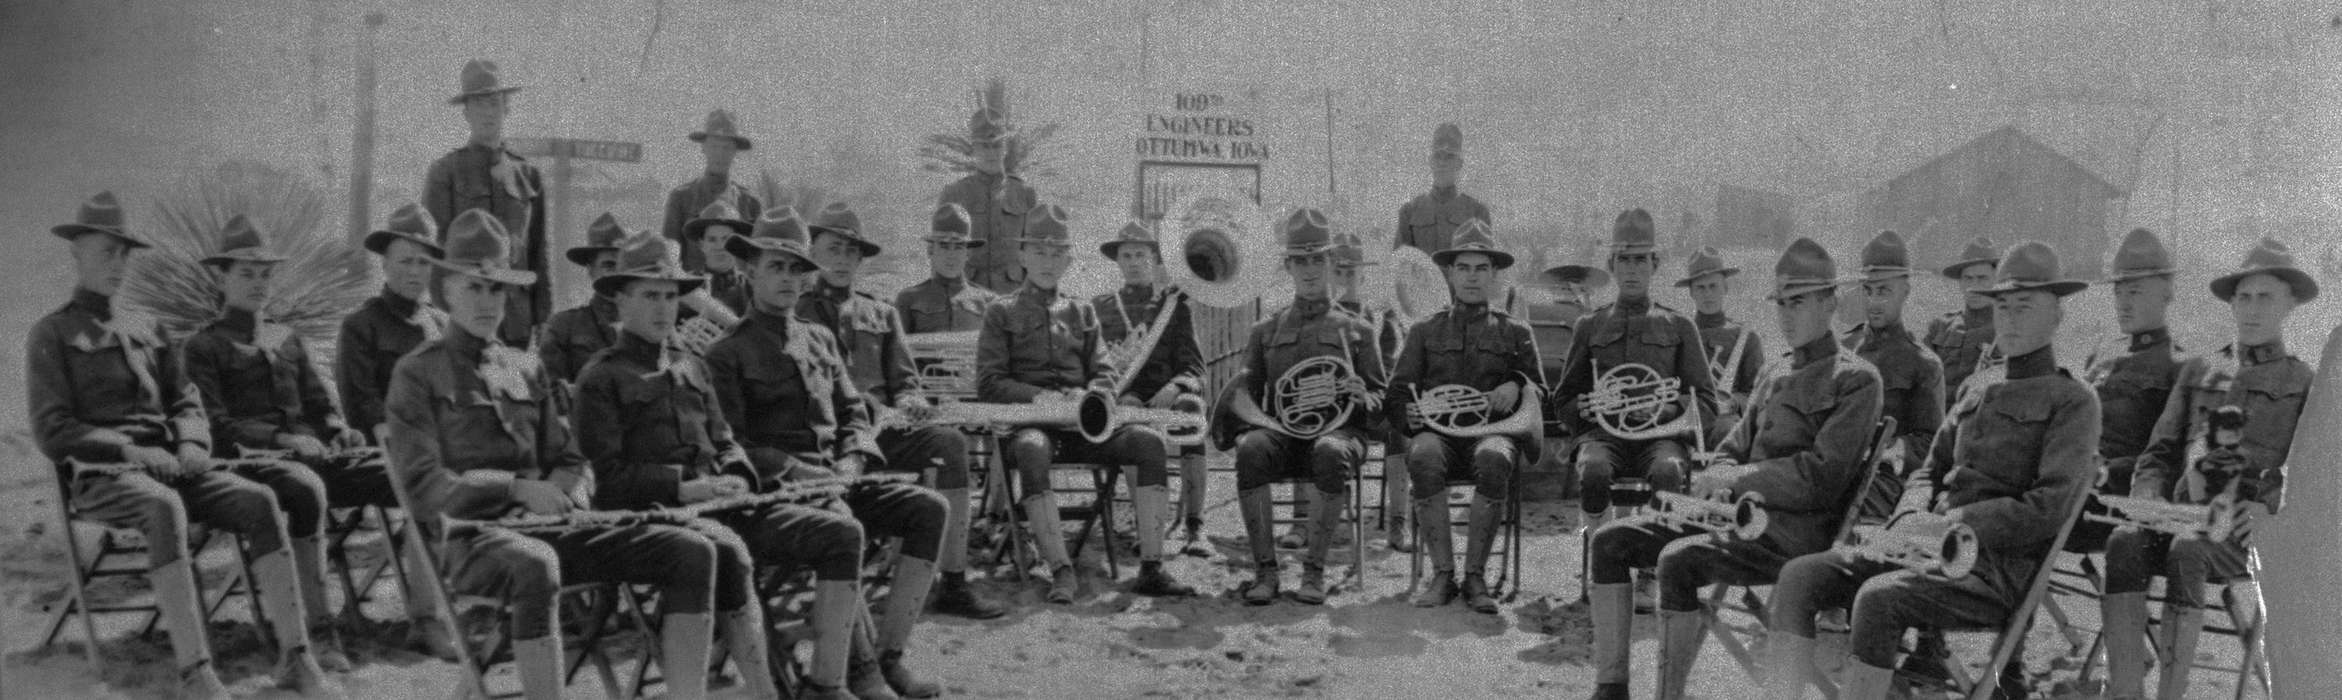 band, french horn, Portraits - Group, Iowa, flute, USA, Lemberger, LeAnn, Military and Veterans, trumpet, Iowa History, military, tuba, history of Iowa